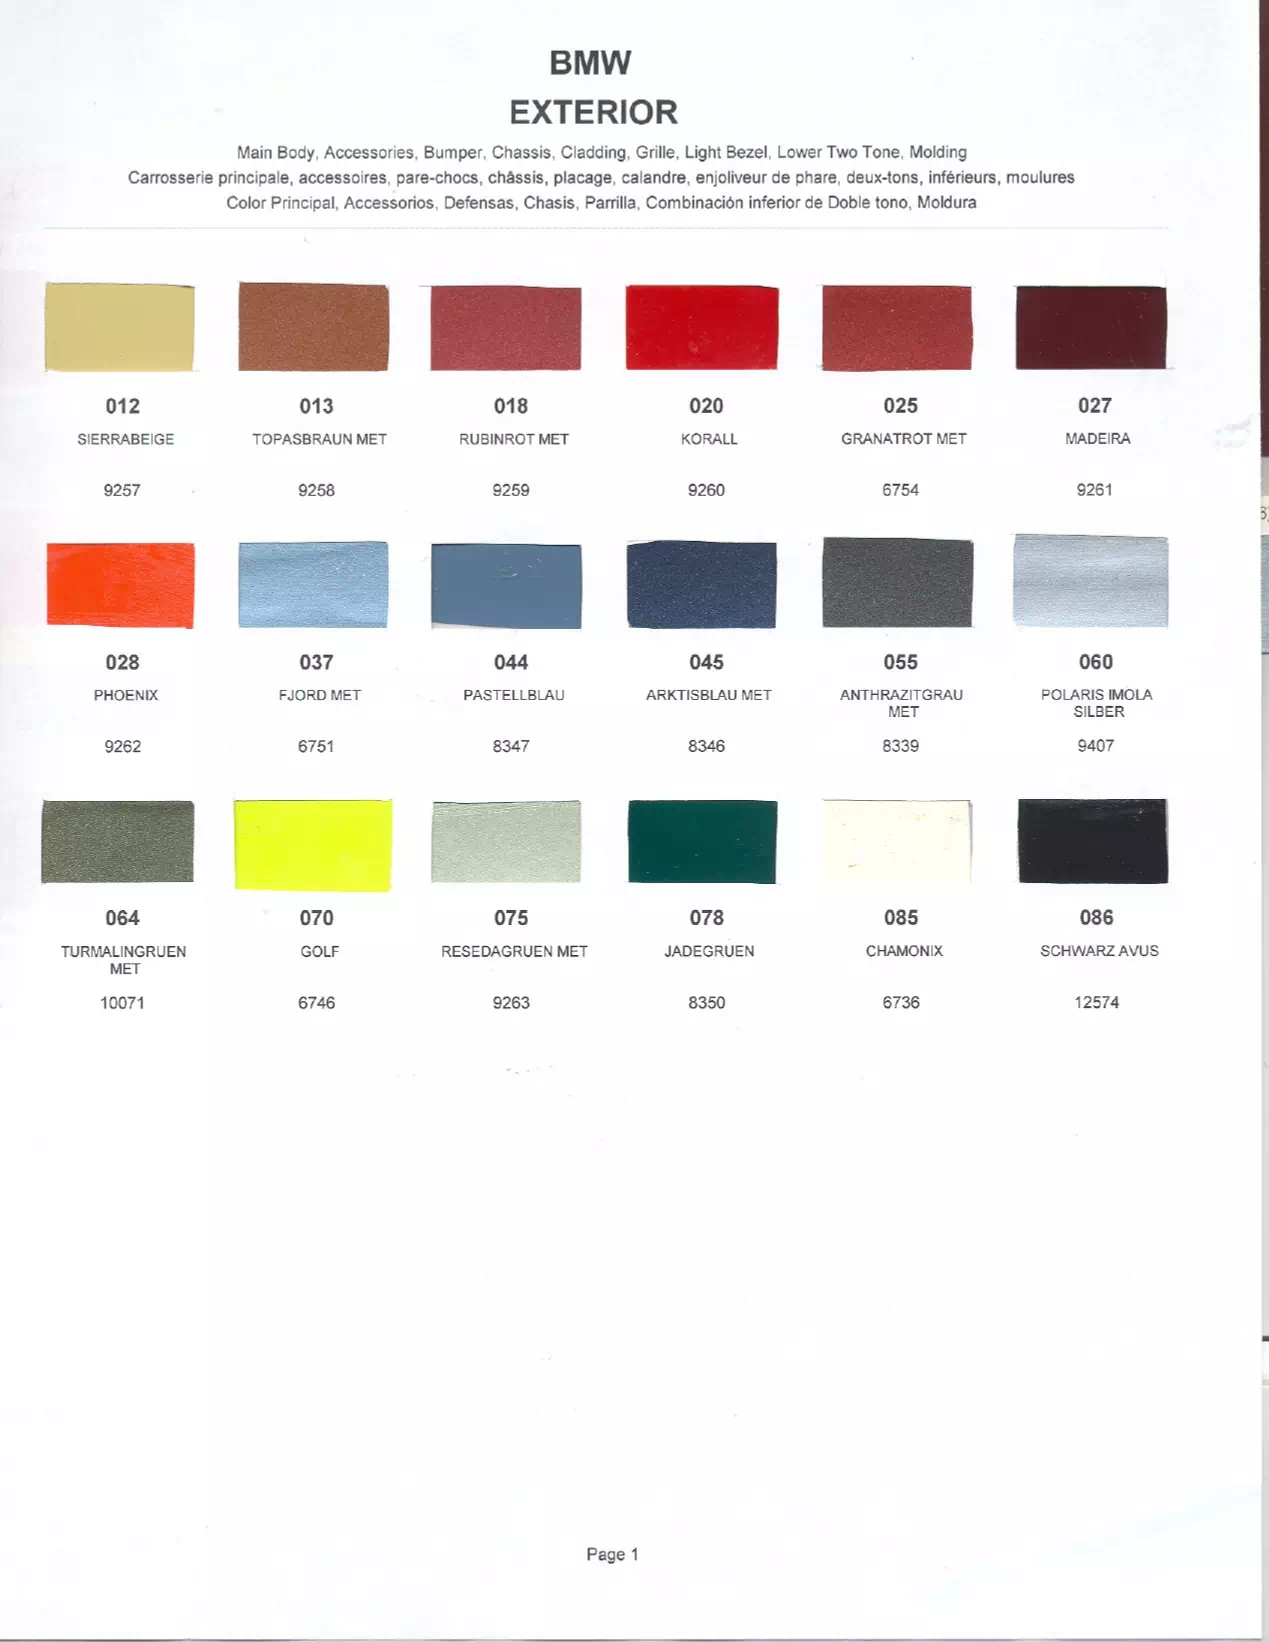 exterior paint colors and their ordering codes for bmw vehicles